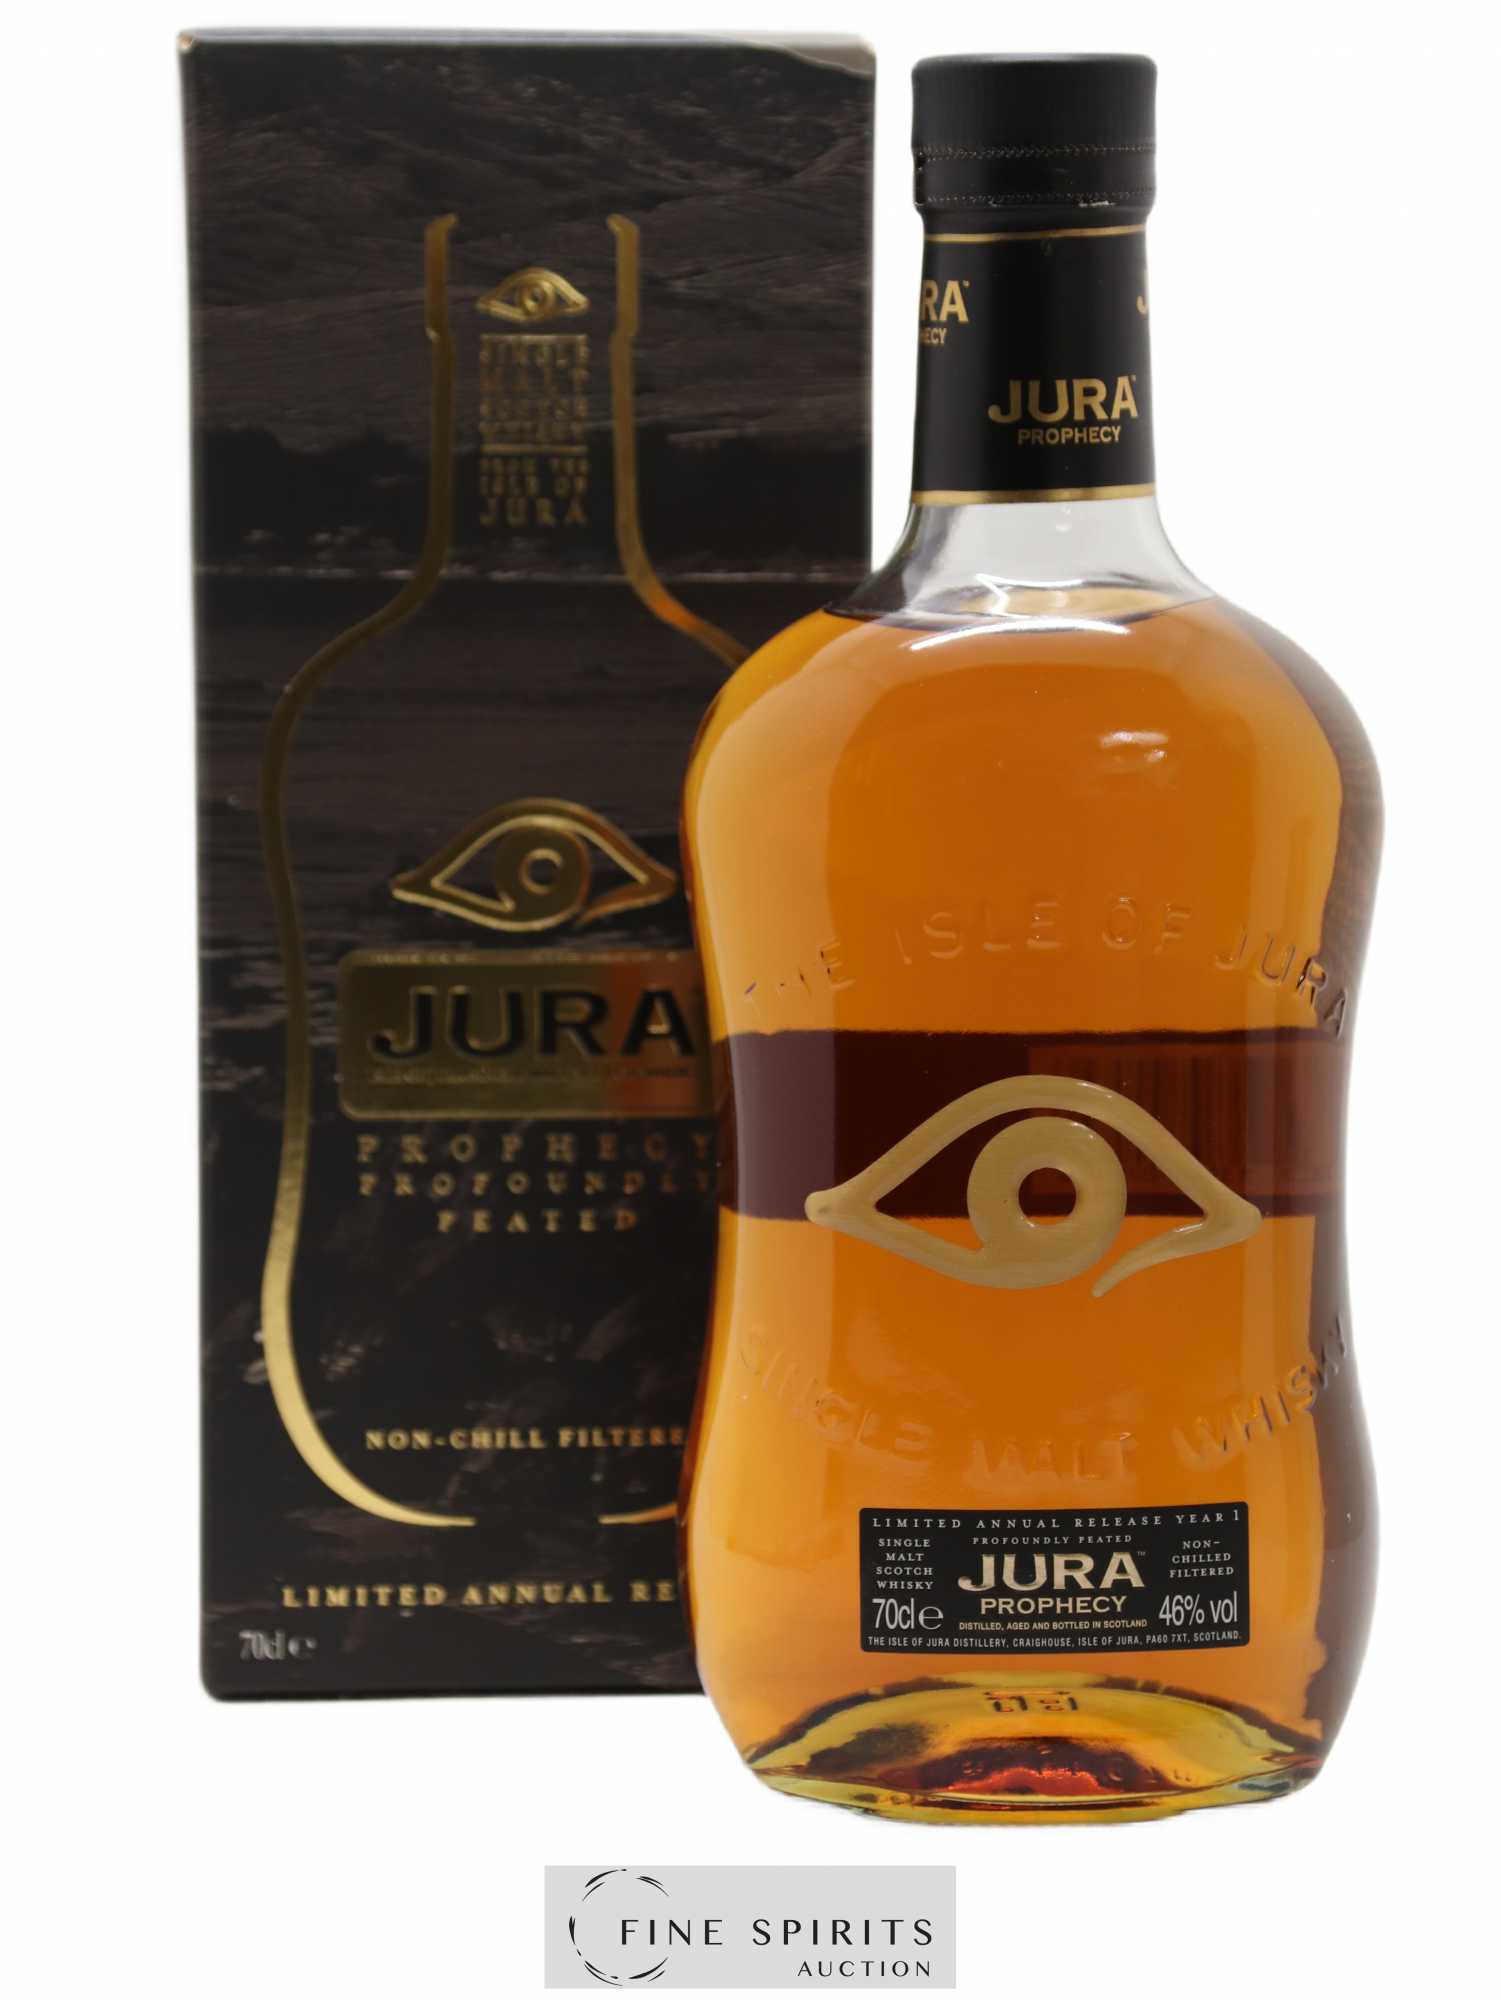 Jura Of. Prophecy Limited Annual Release Year 1 